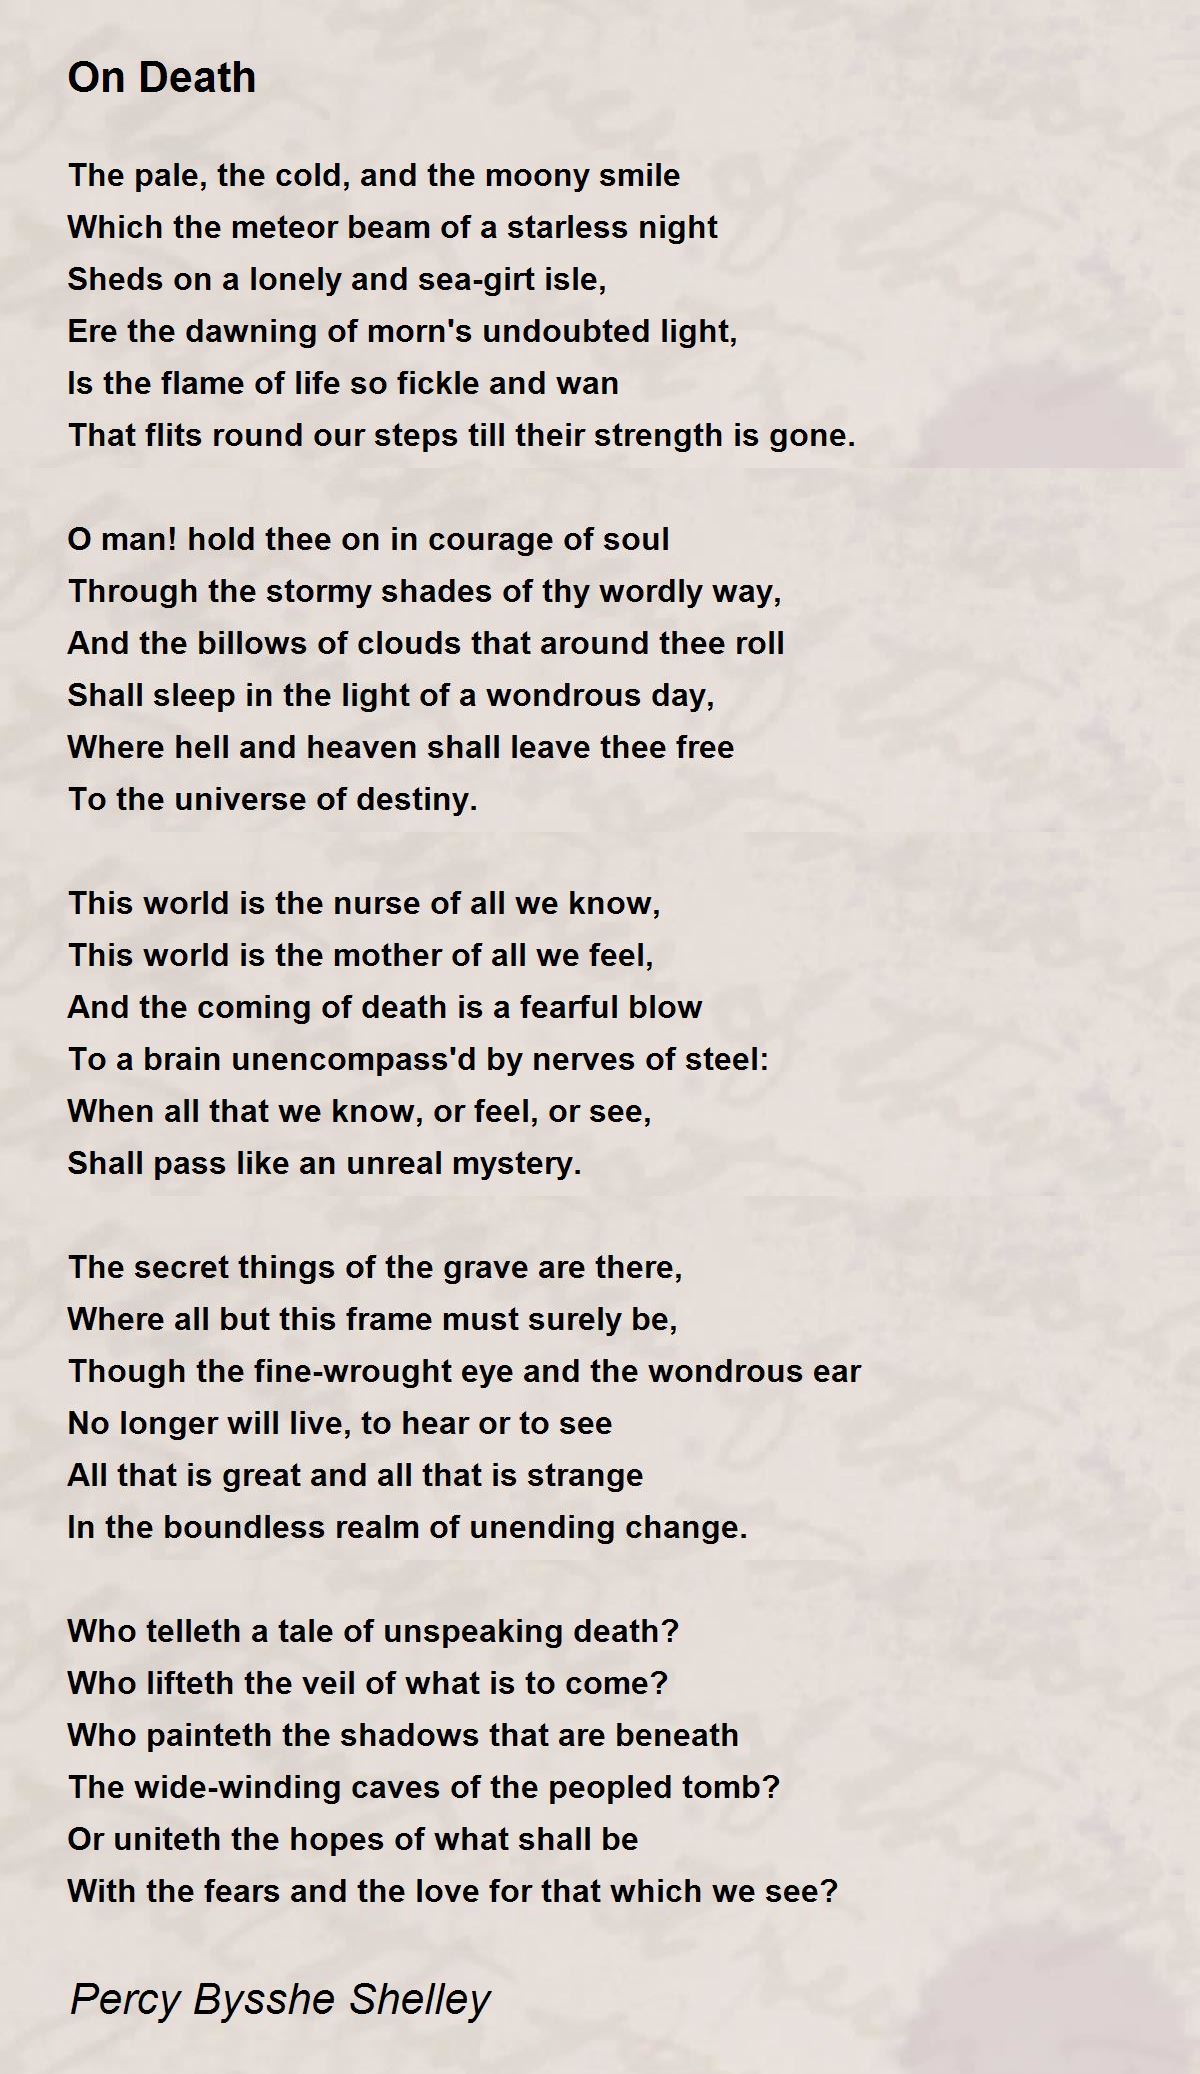 On Death by Percy Bysshe Shelley - On Death Poem